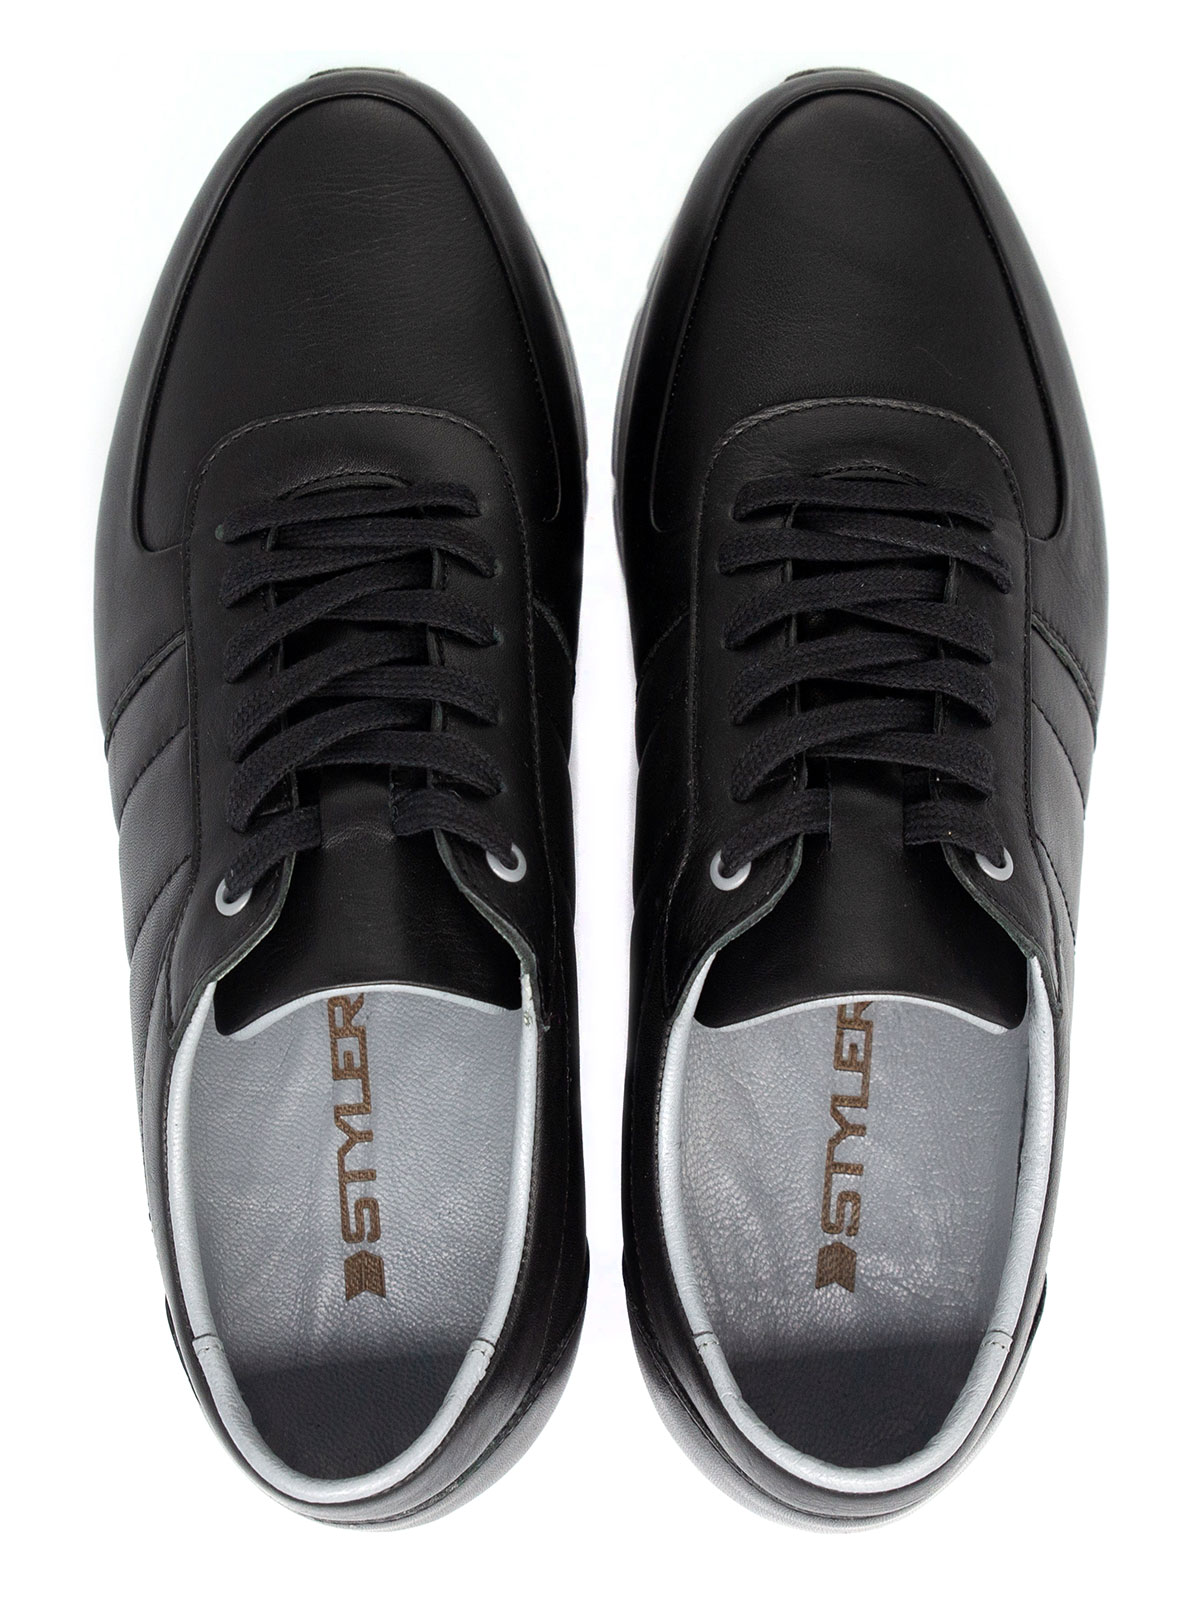 Sporty black leather shoes - 81100 - € 41.62 img2